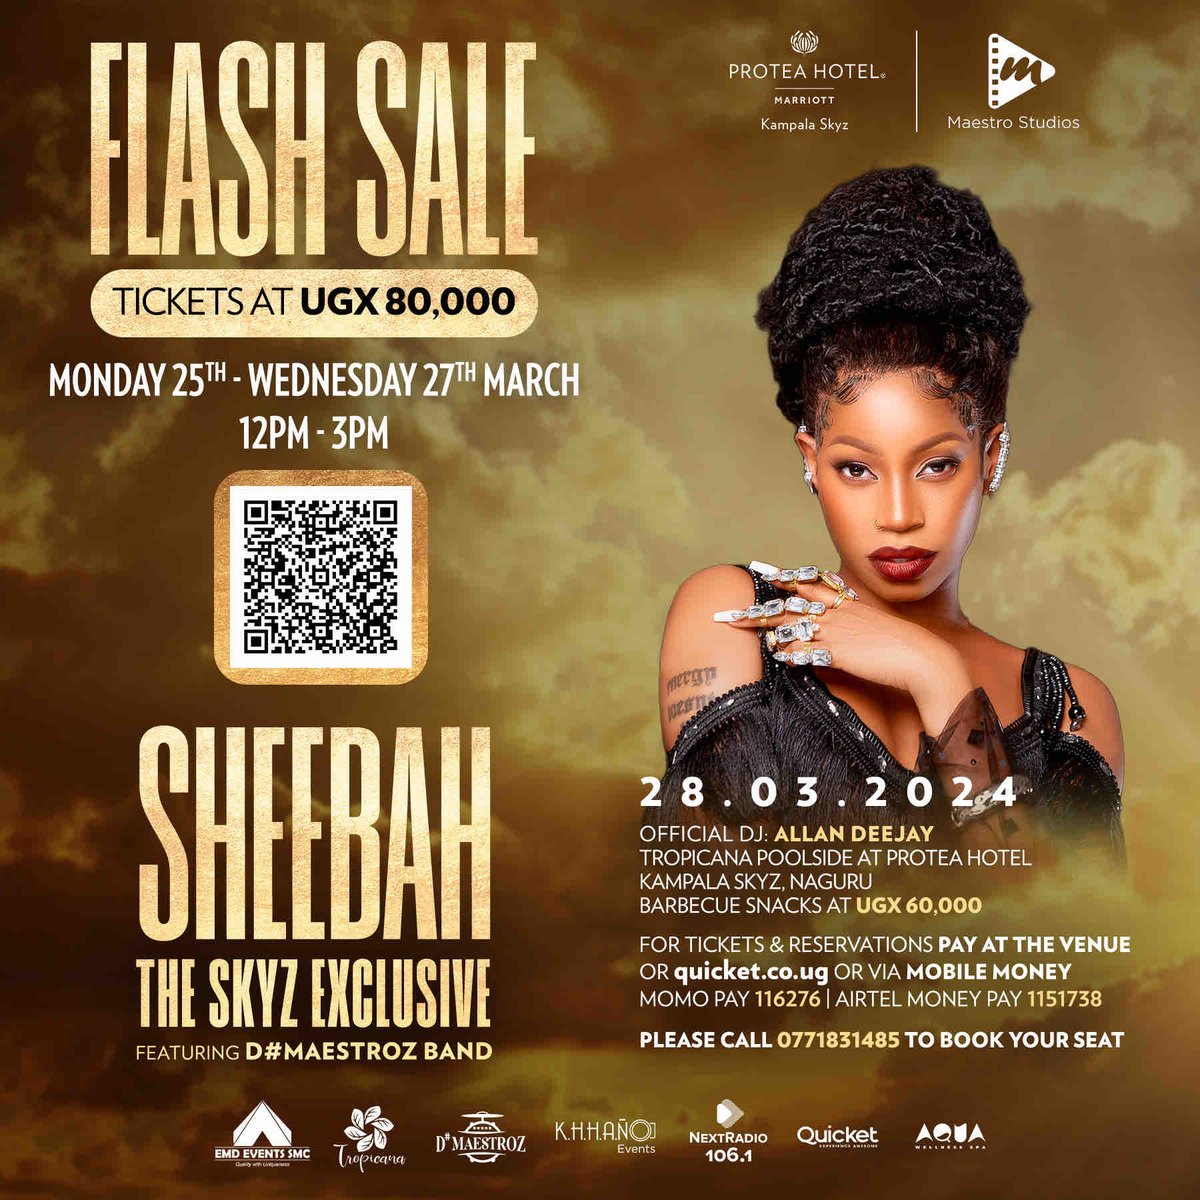 Skyz Fam!We’re throwing a flash sale just for you so we enjoy Sheebah live at Skyz Exclusive!Tthis monday to Wednesday 12-3pm, tickets go for just 80k!Call us on 0771 831 485 or click our link in bio!